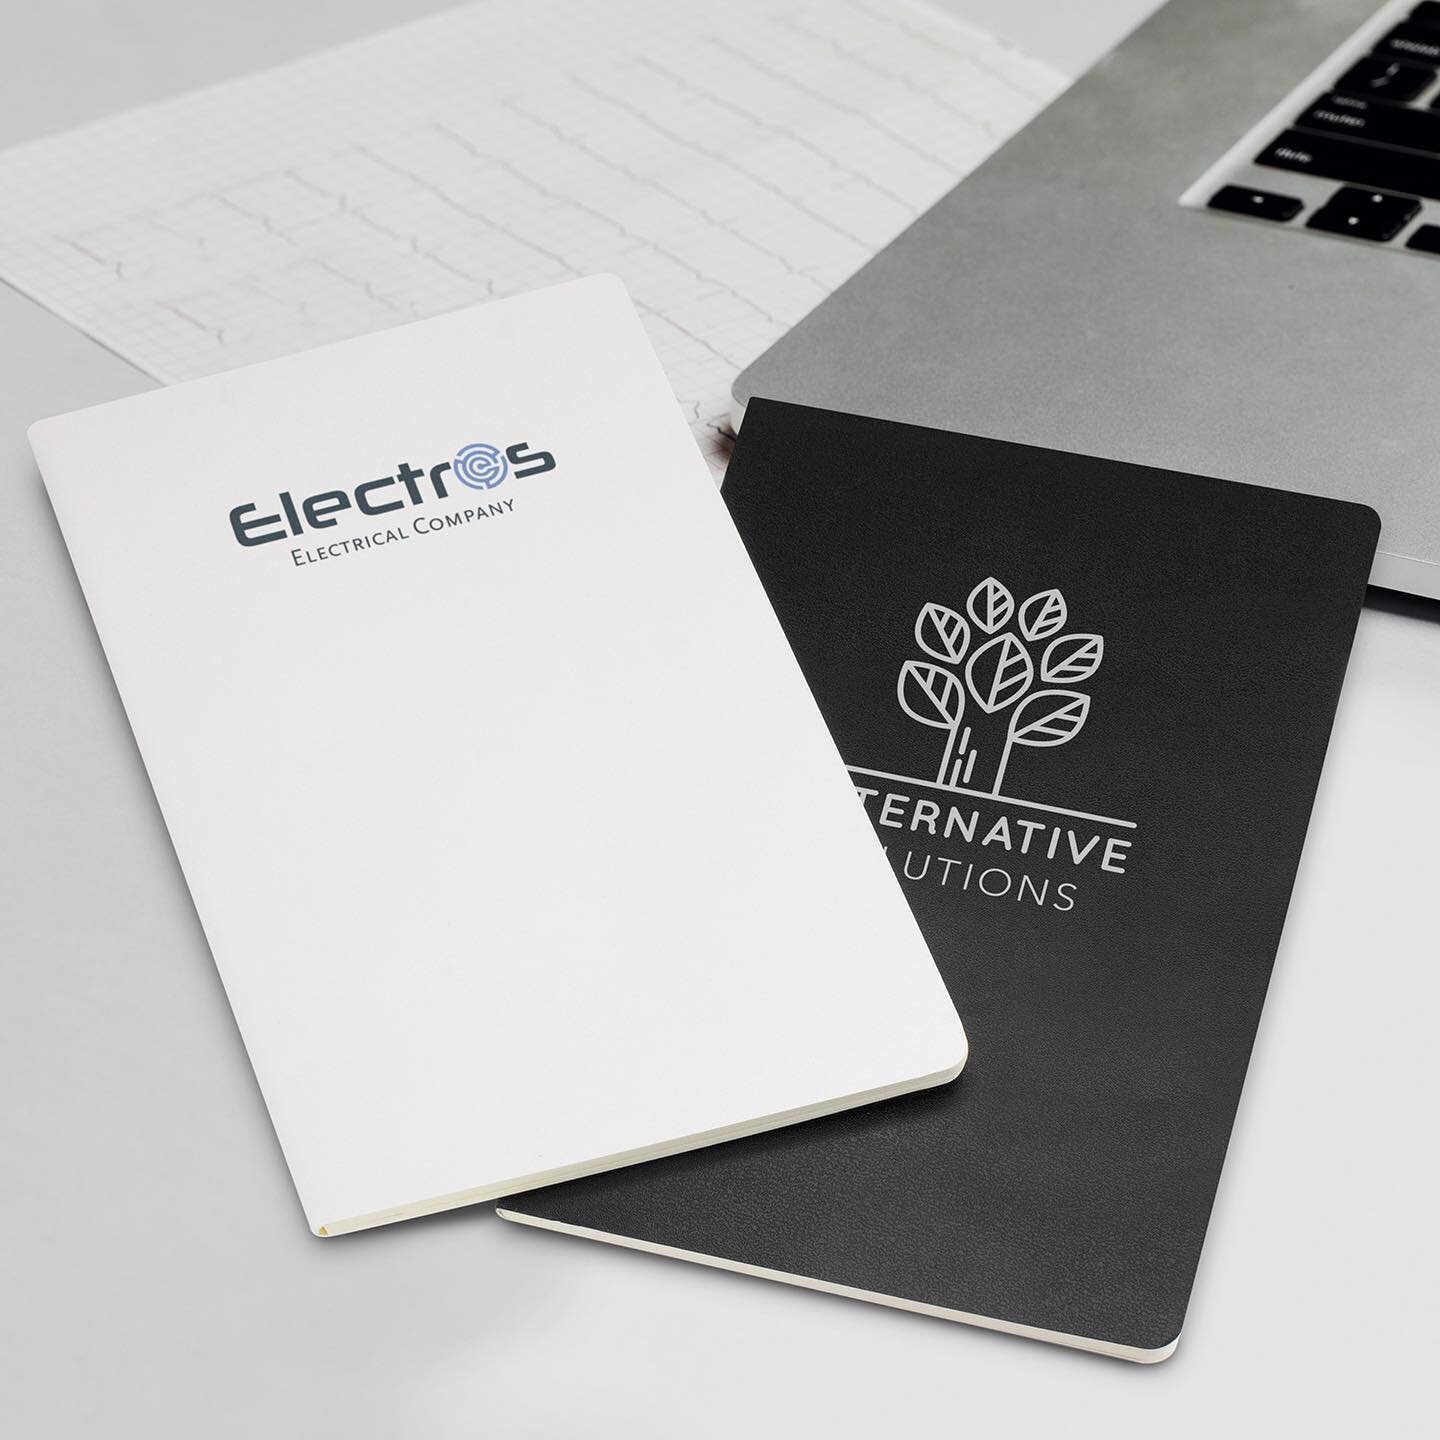 Custom branded journals: a must-have for every business owner 🙌

DM for more info 💙
.
.
.
.
.
#merchdesign #merchandising #merchausmade #promoproducts #promoproductswork #promotionproducts #tshirtmerch #businessmerch #printingbrisbane #printingserv